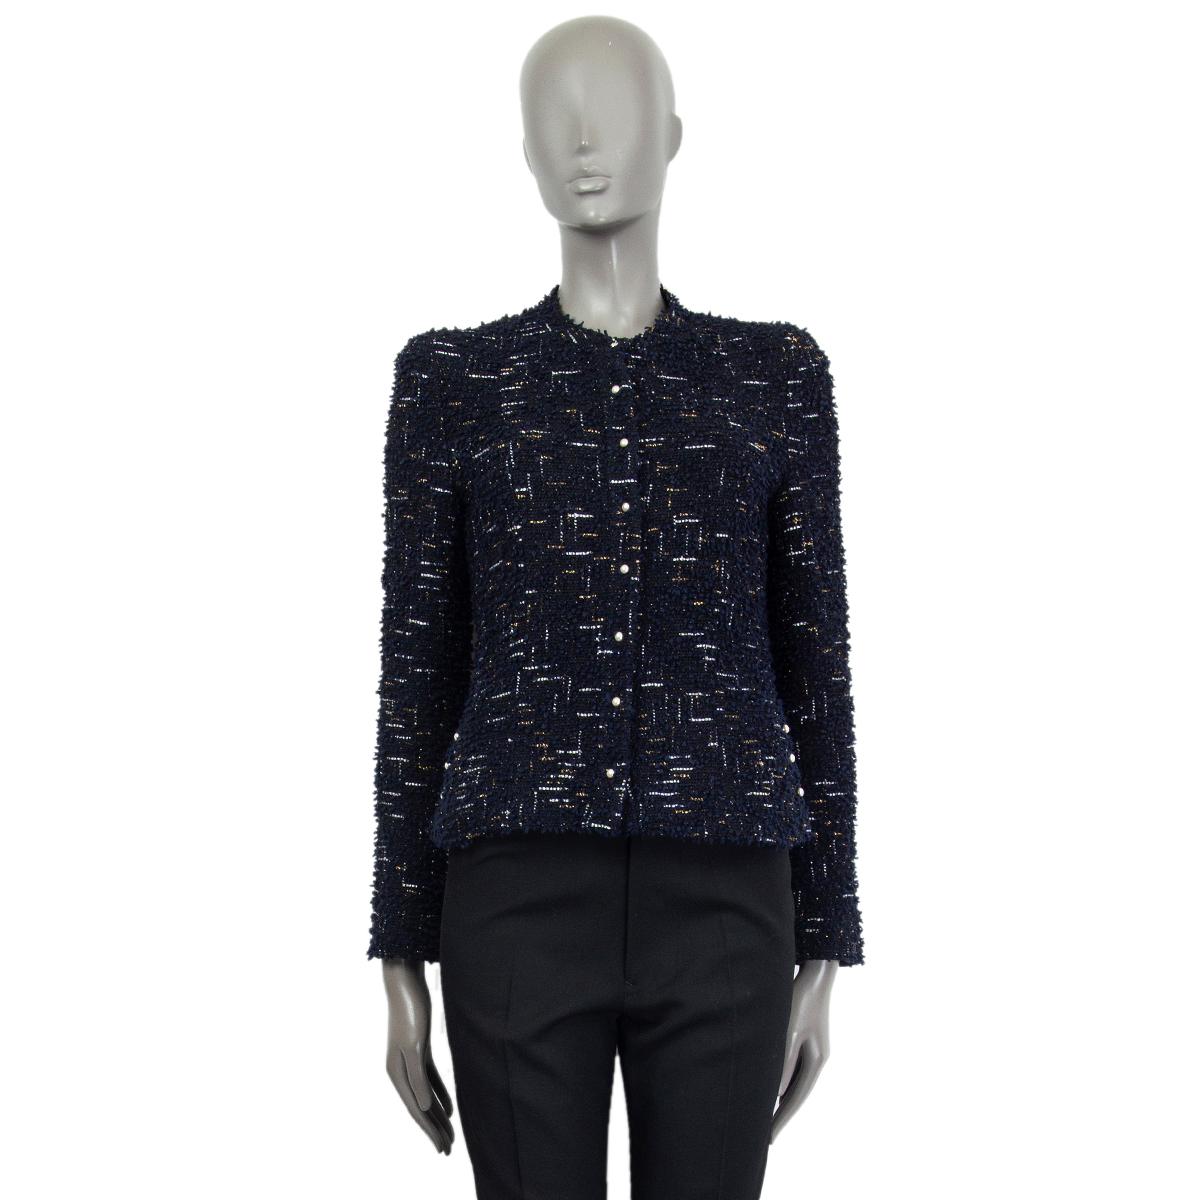 Chanel collarless tweed jacket in navy blue and black polyamide (61%), polyester (27%) and wool (12%) with silver and gold lurex threads. Faux pearl button details on the front, sleeve and sides. Lined in black silk (100%) with antique silver-tone